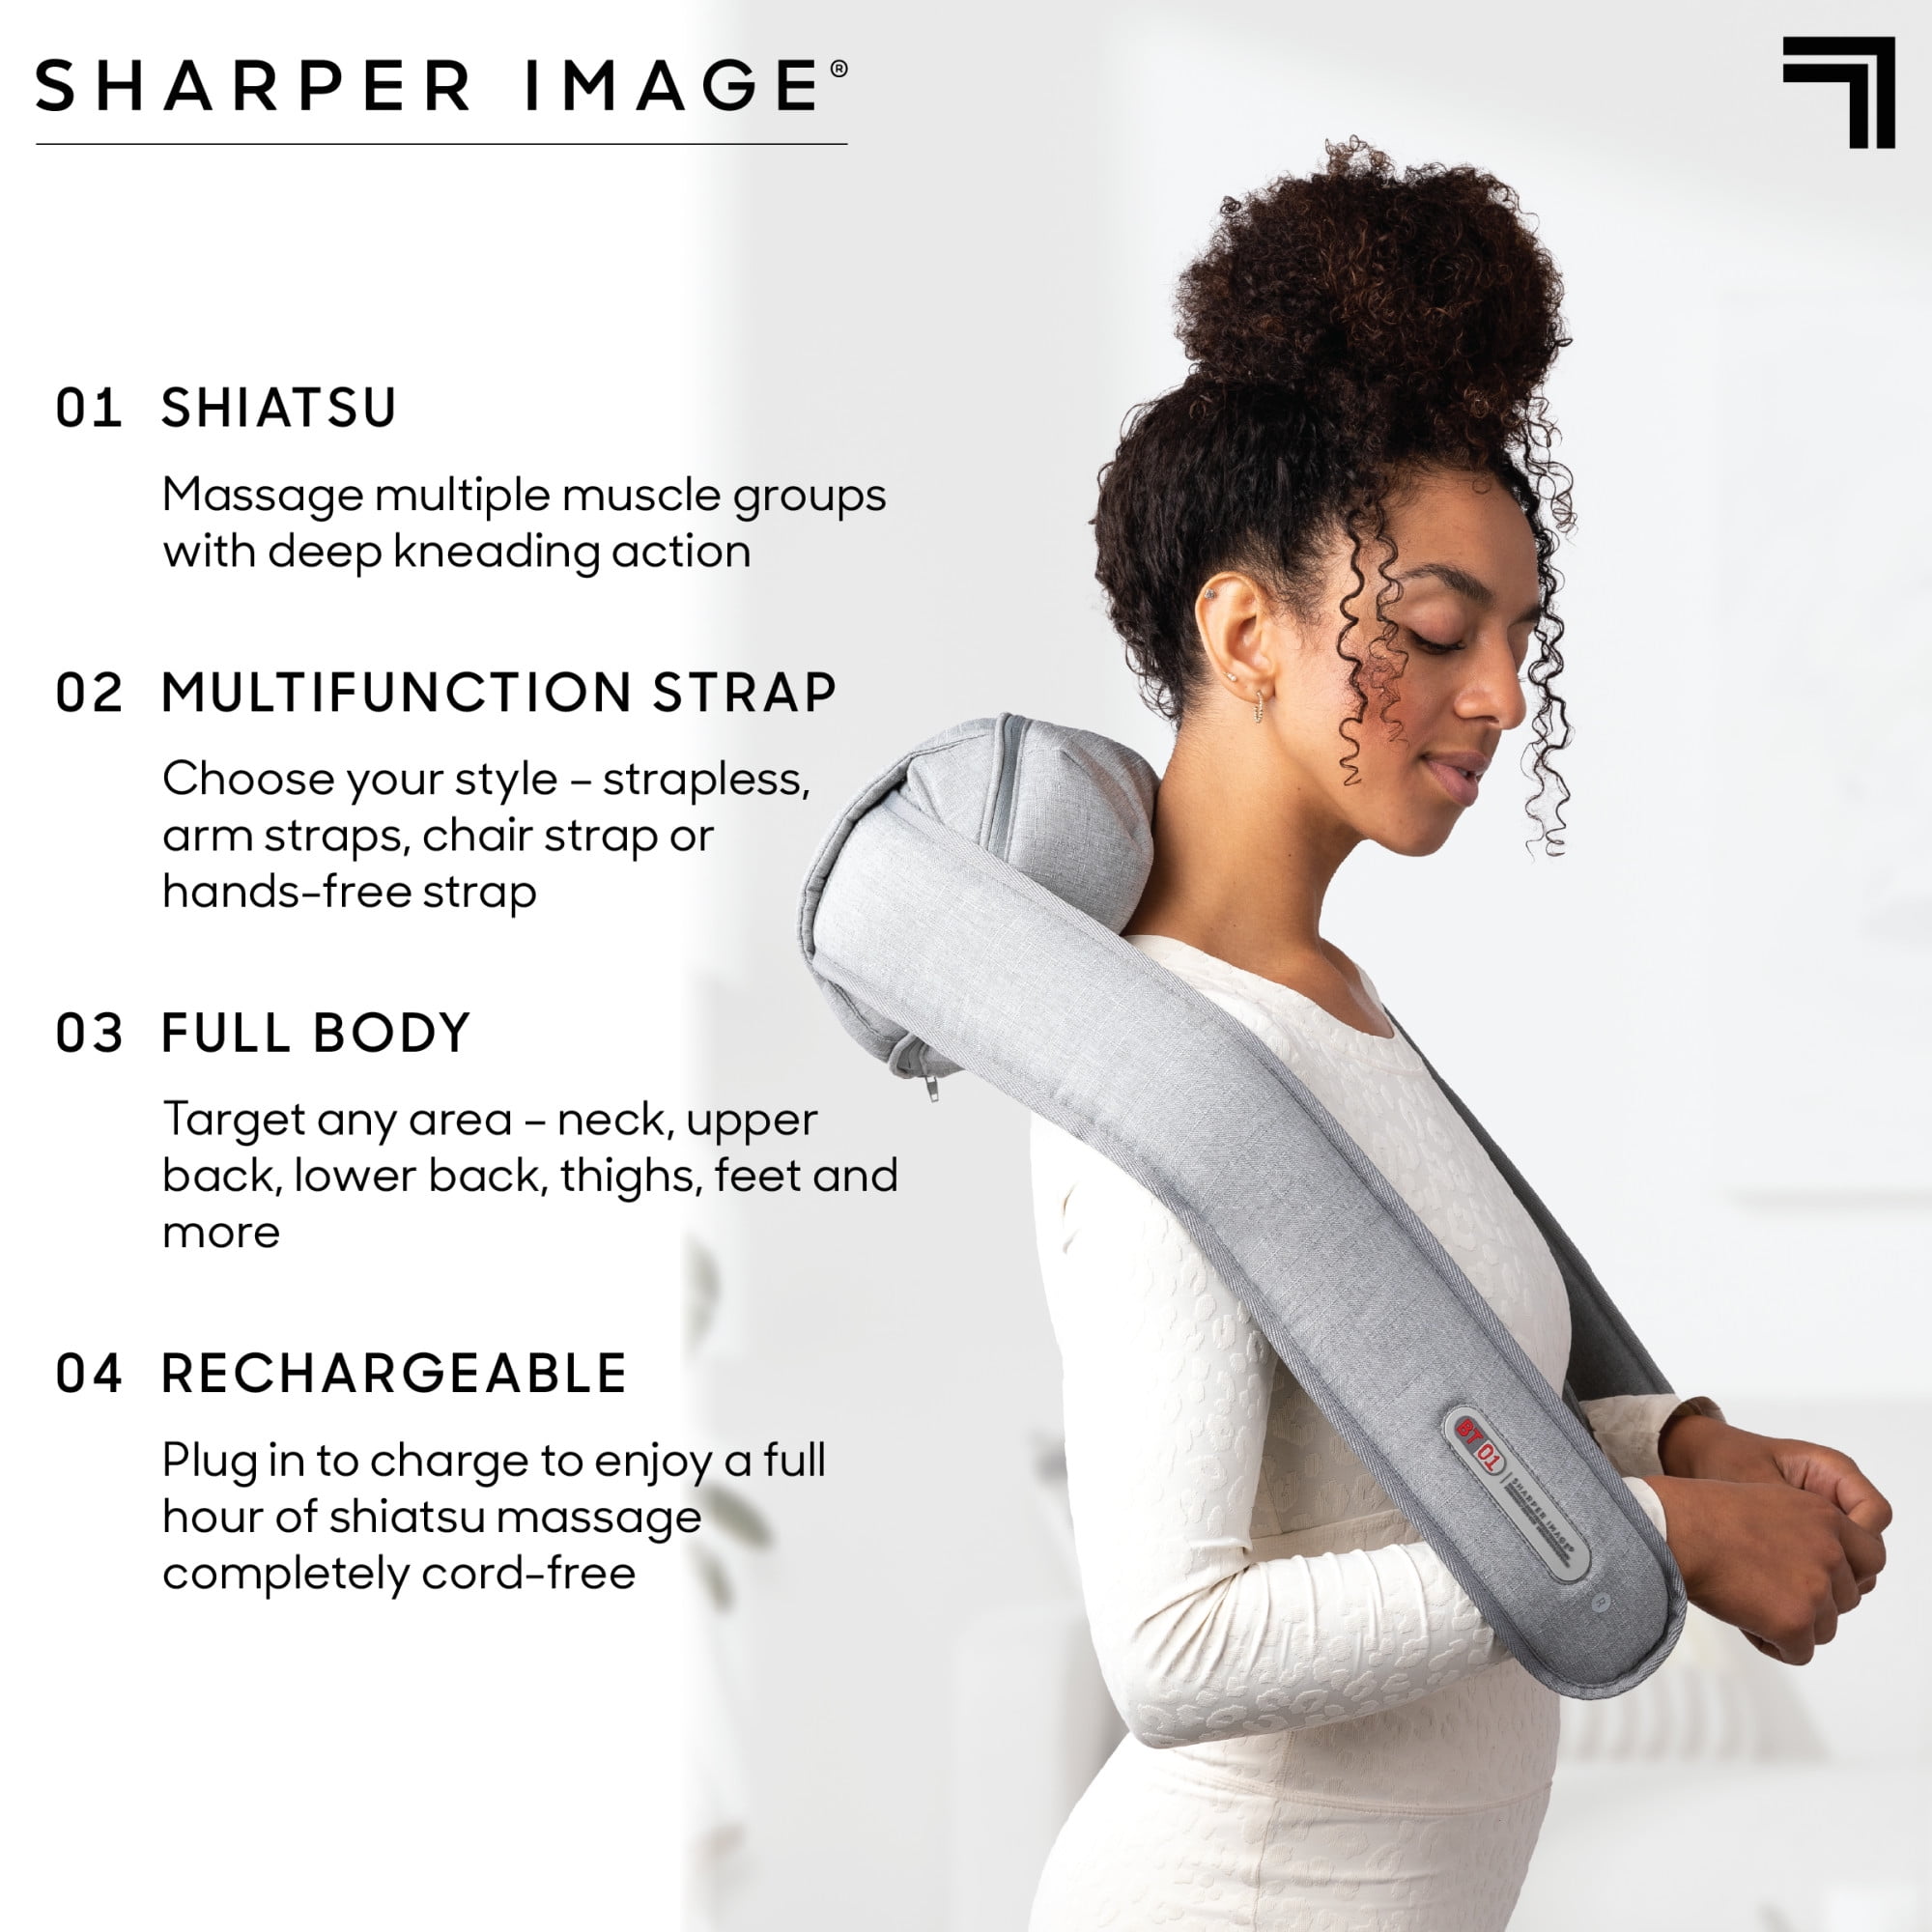  Sharper Image Realtouch Cordless Neck + Shoulder Shiatsu  Massager, 3 Speed Settings with Soothing Heat and Optional Hood Attachment,  Rechargeable Battery : Health & Household